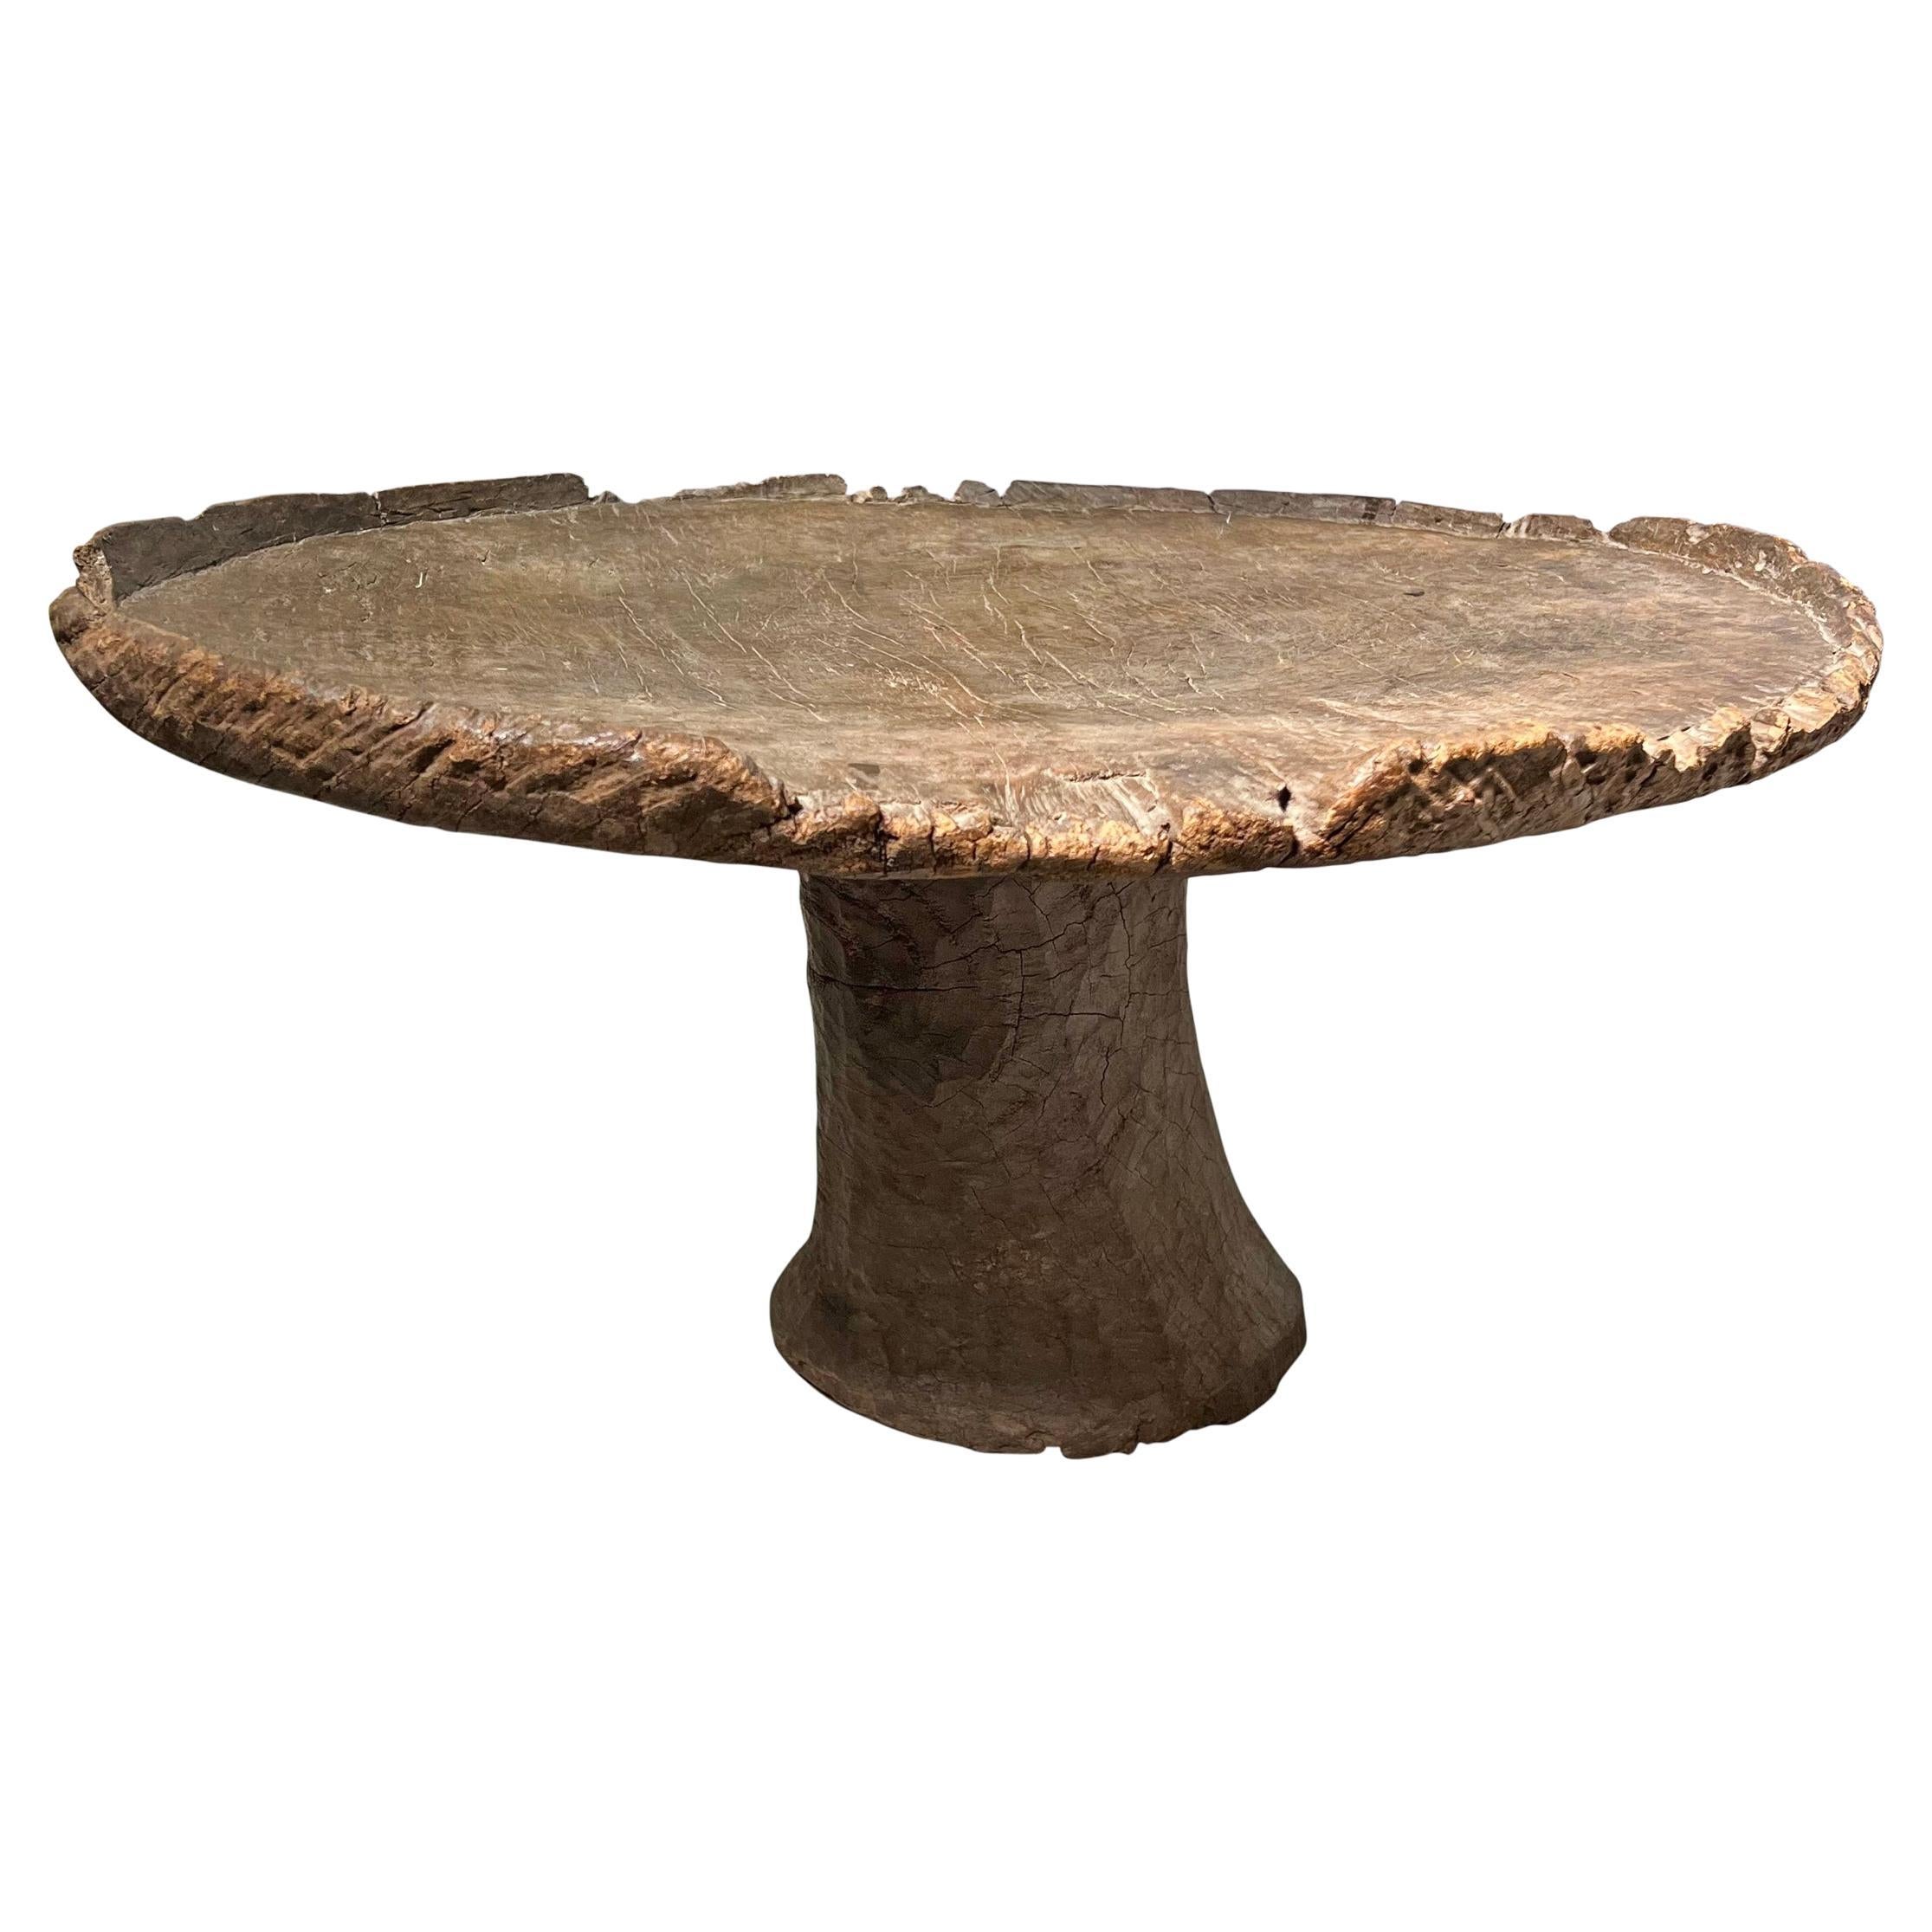 Early 20th Century Ethiopian Low Table